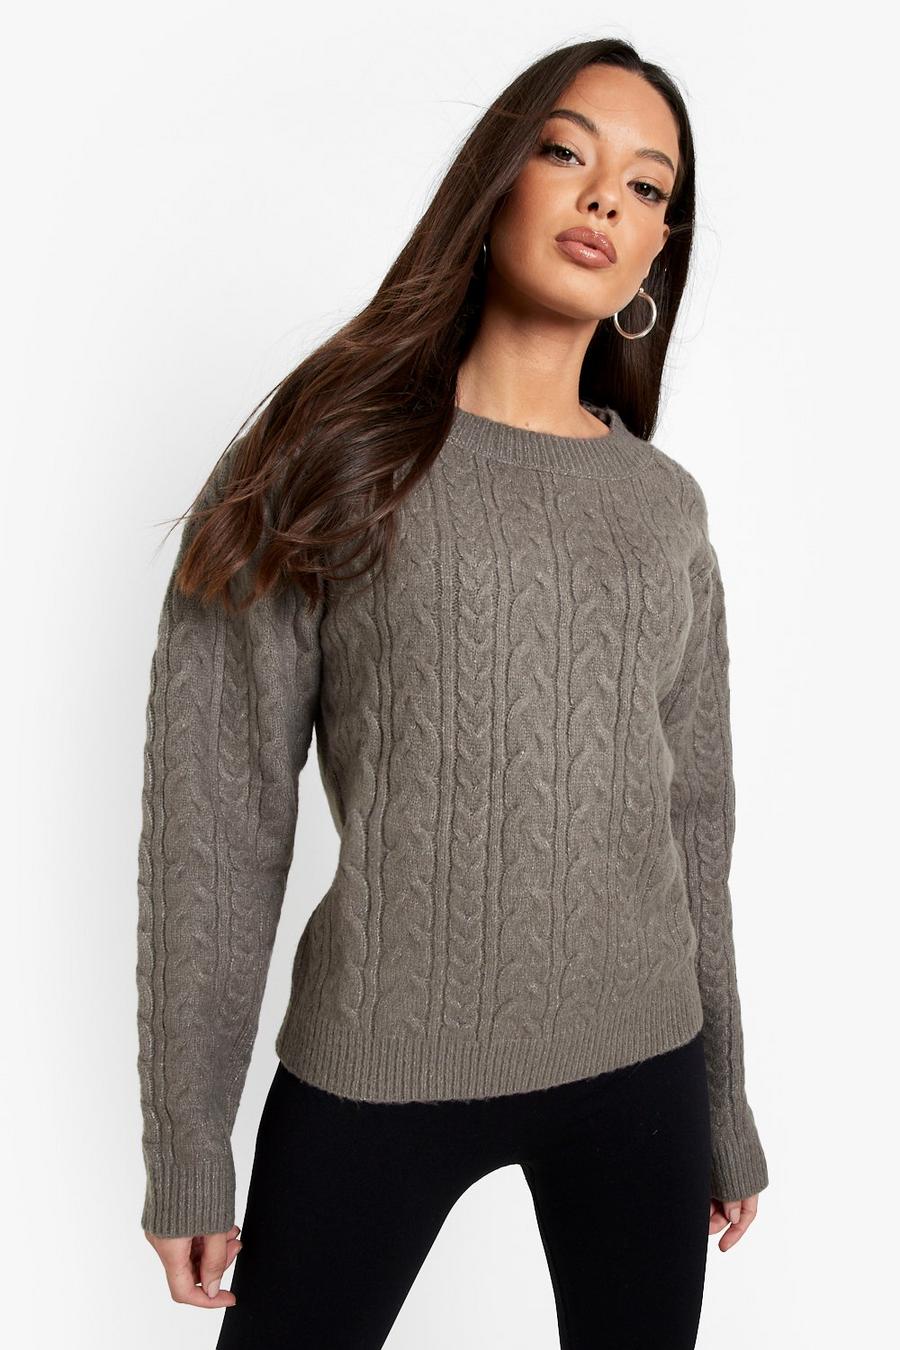 Charcoal grey Cable Knitted Jumper